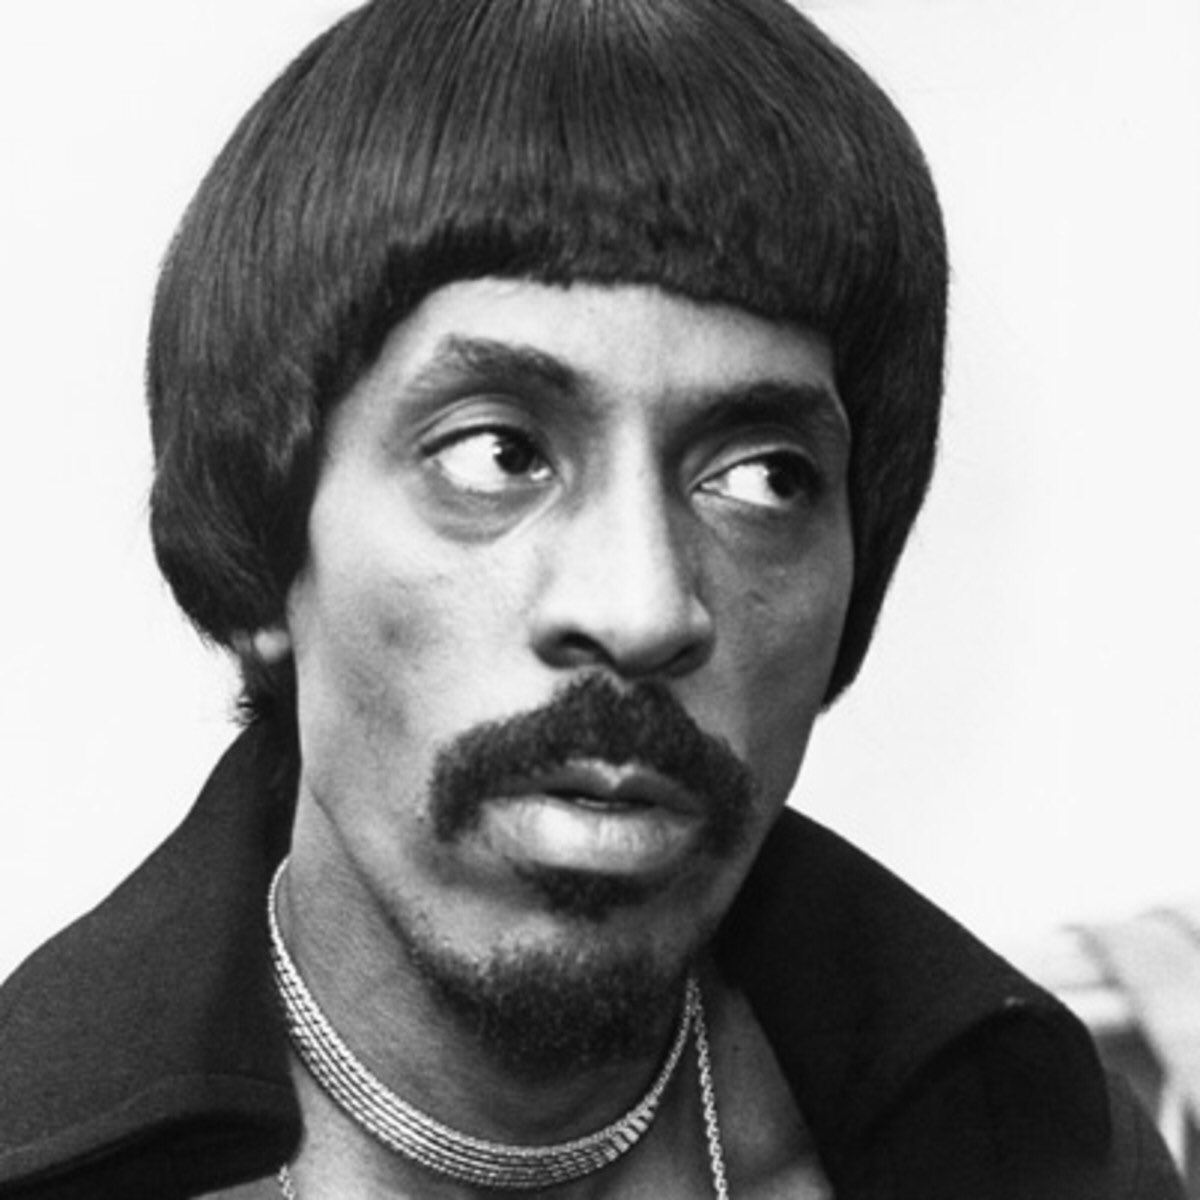 Happy Birthday to the legend Ike Turner. May you continue to Rest In Peace 